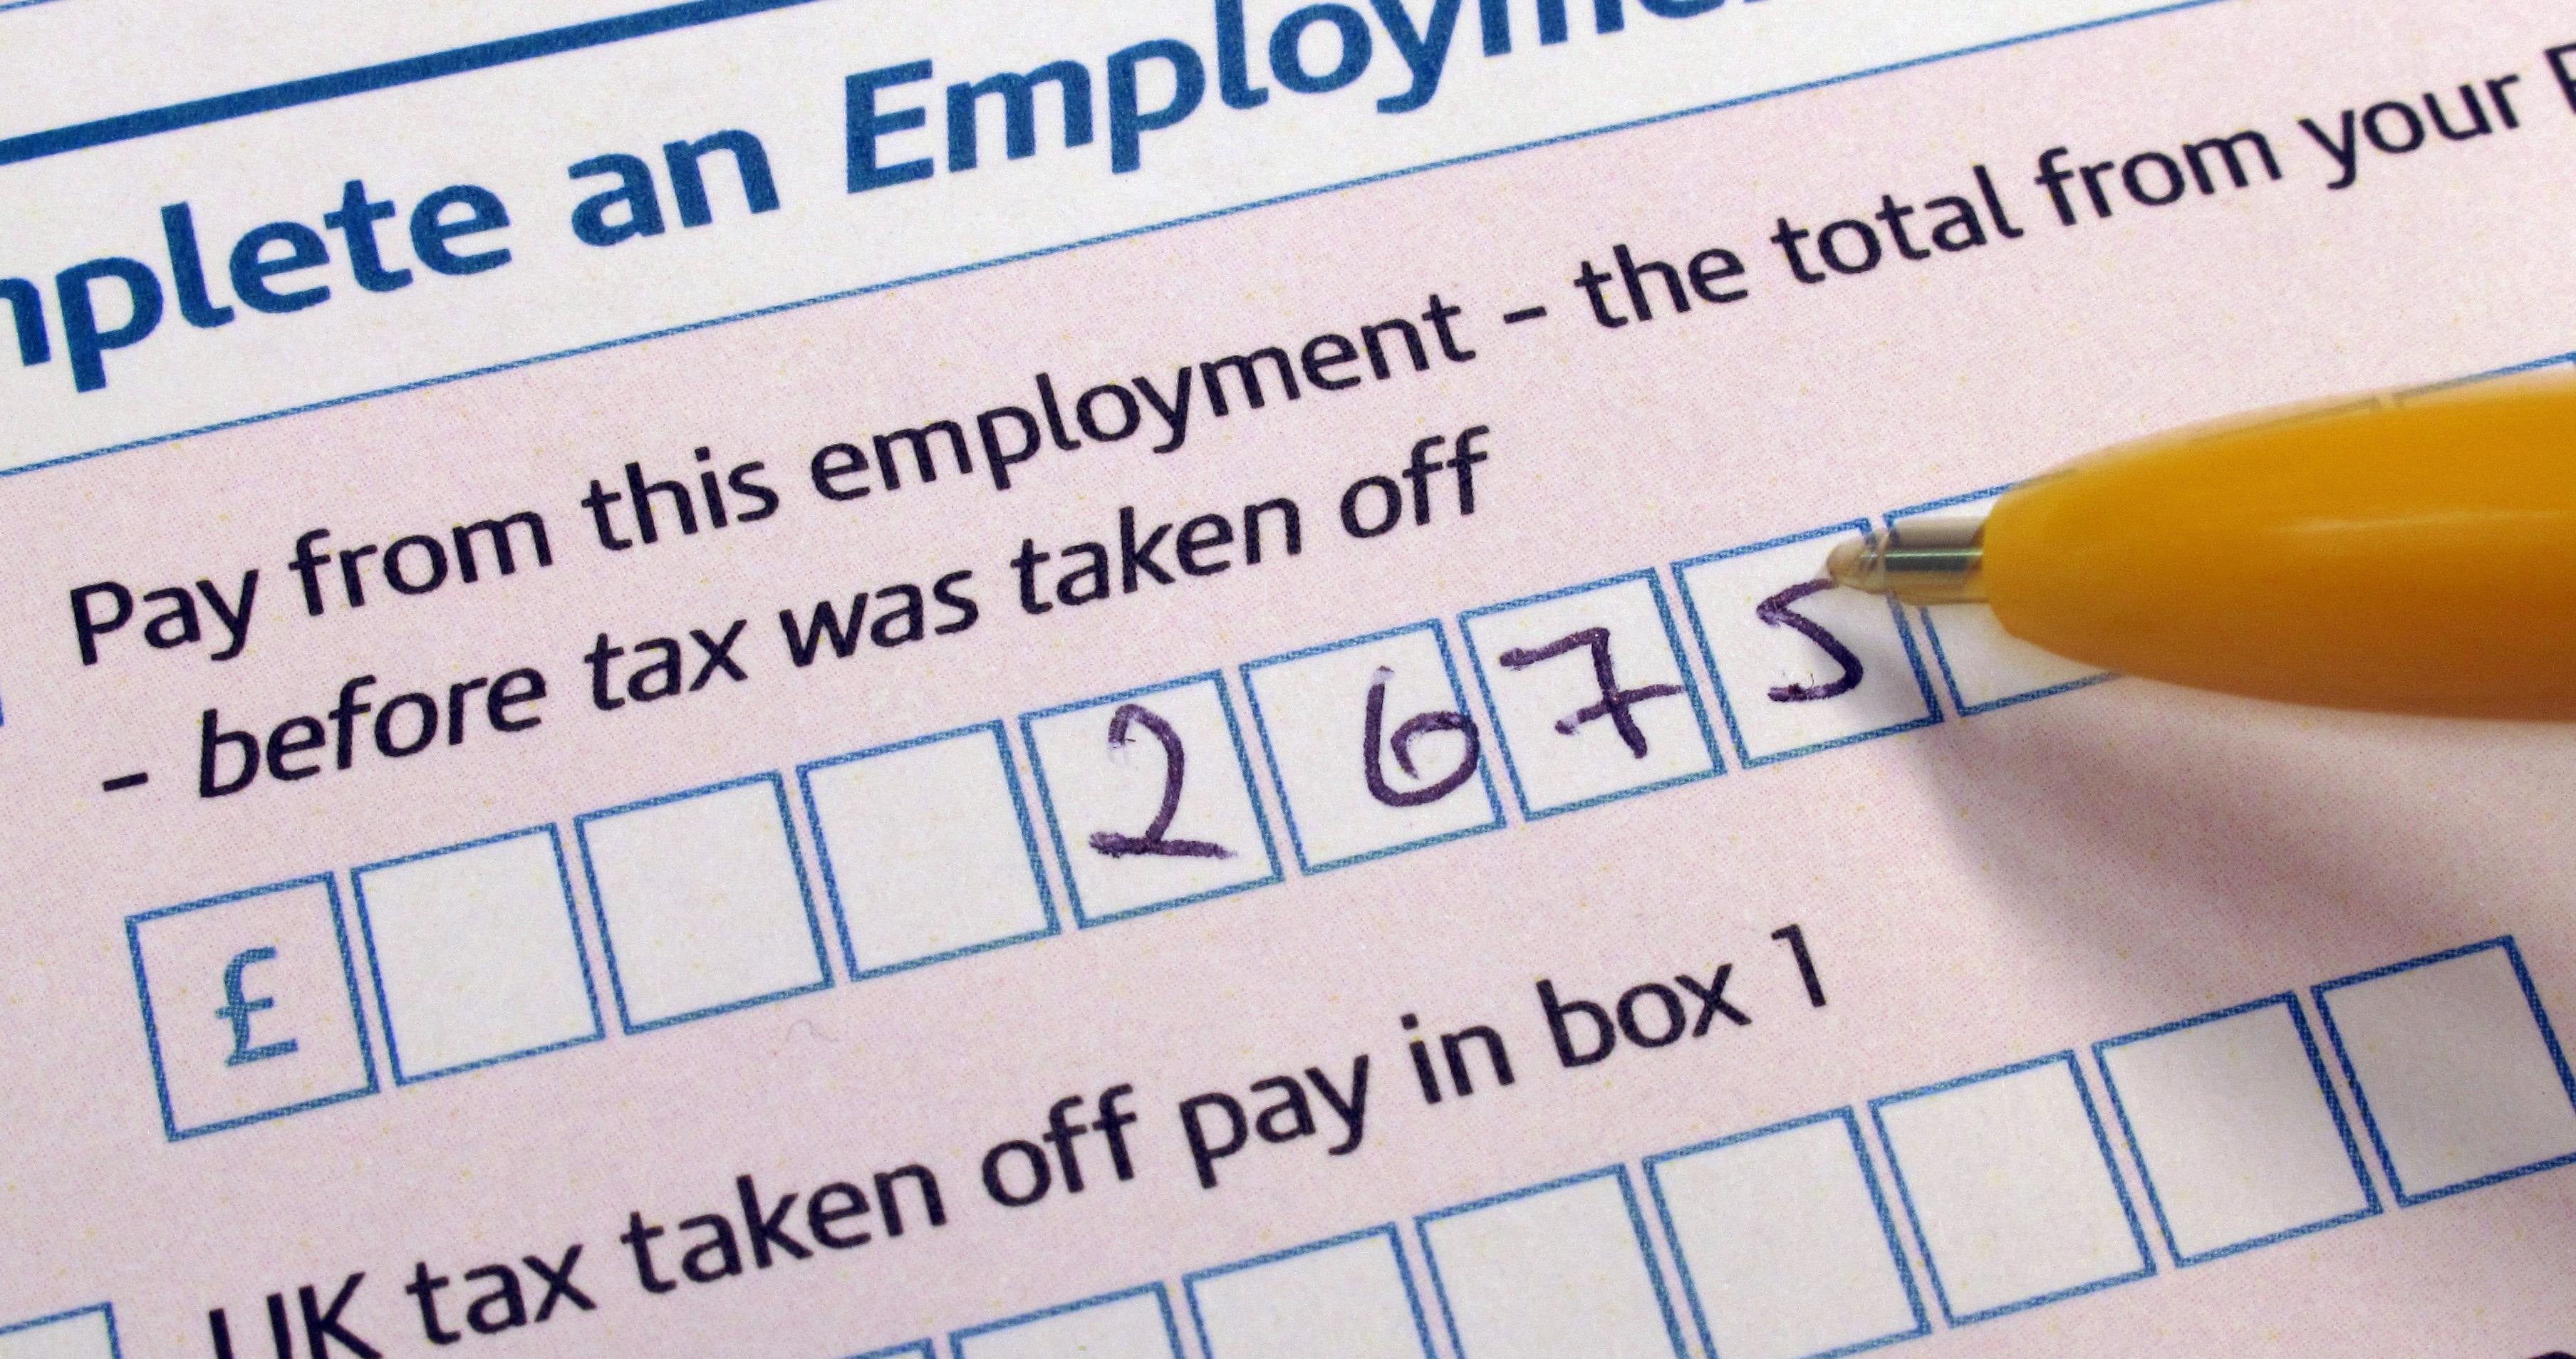 Self-assessment taxpayers are being warned by HM Revenue and Customs to watch out for scam emails, texts and calls which may offer a ‘refund’ or demand unpaid tax (PA)